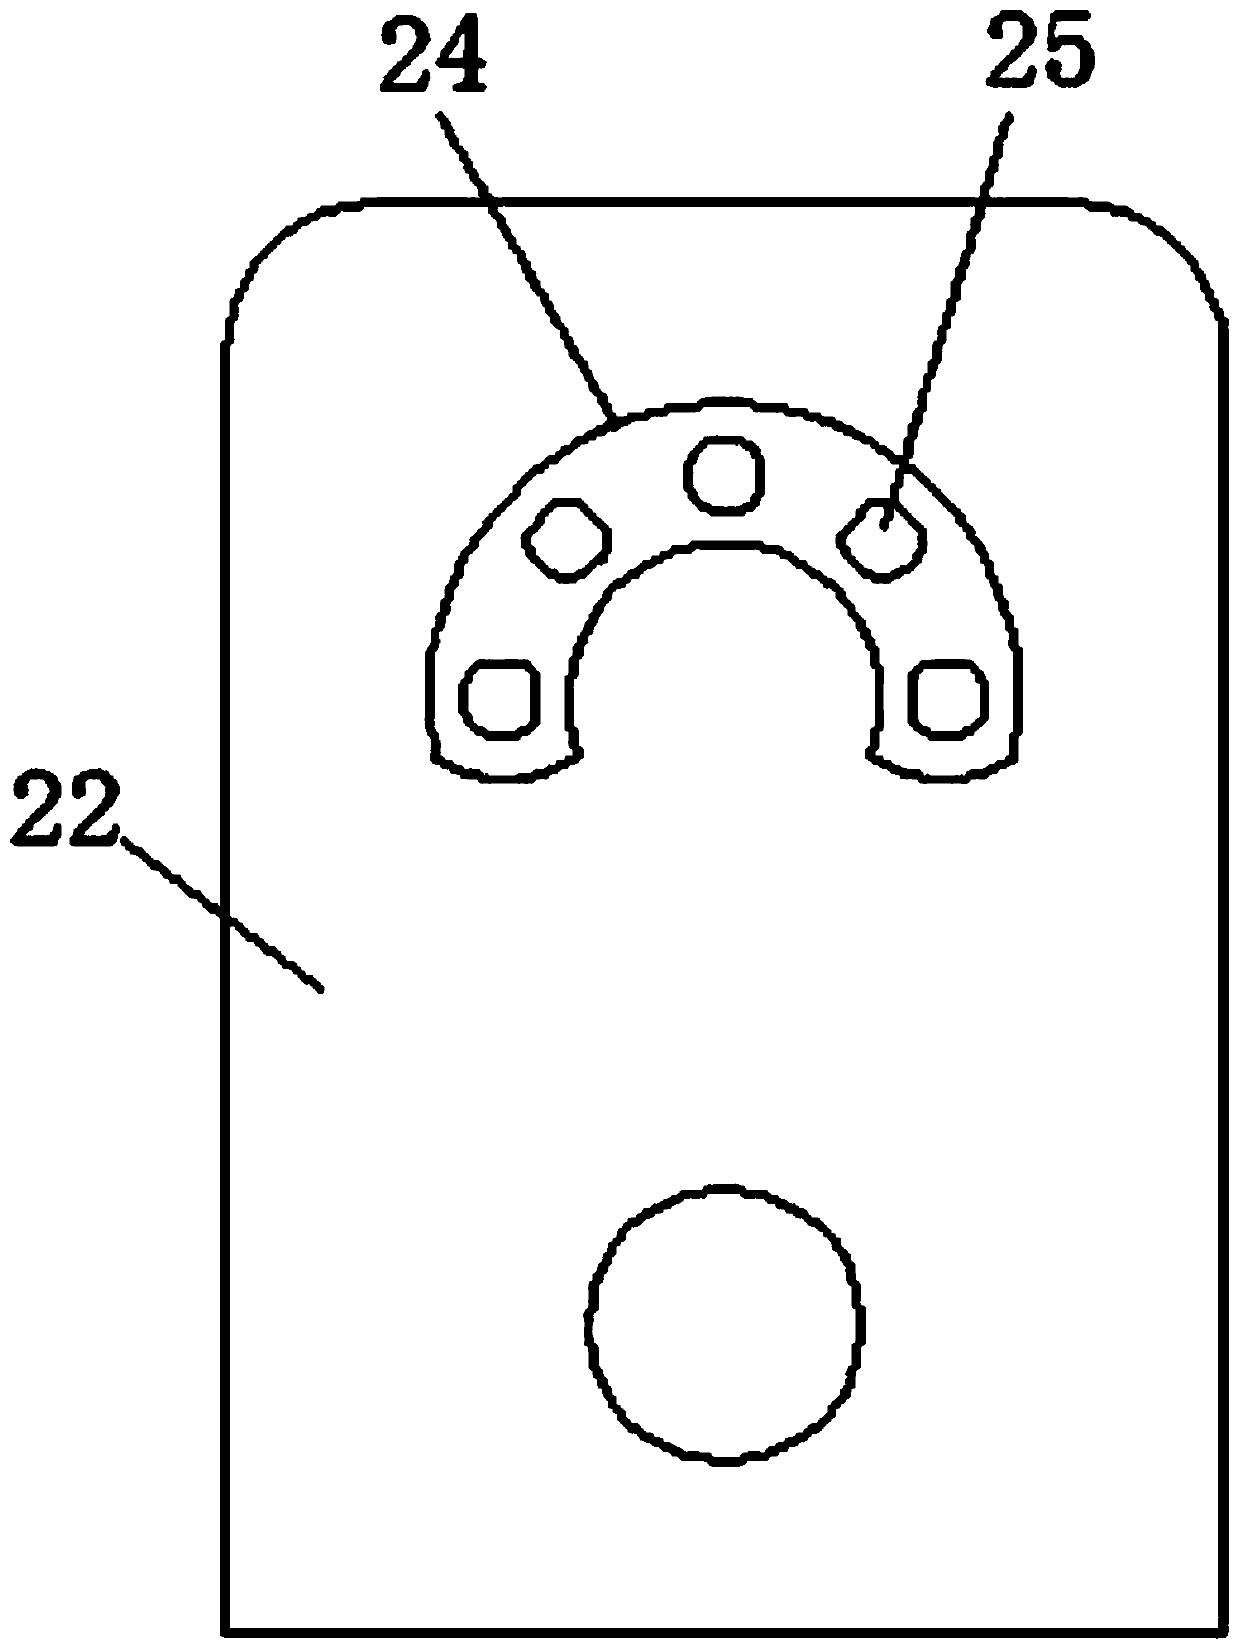 Strength exercise type auxiliary connecting handle for blind crutch and use method of strength exercise type auxiliary connecting handle